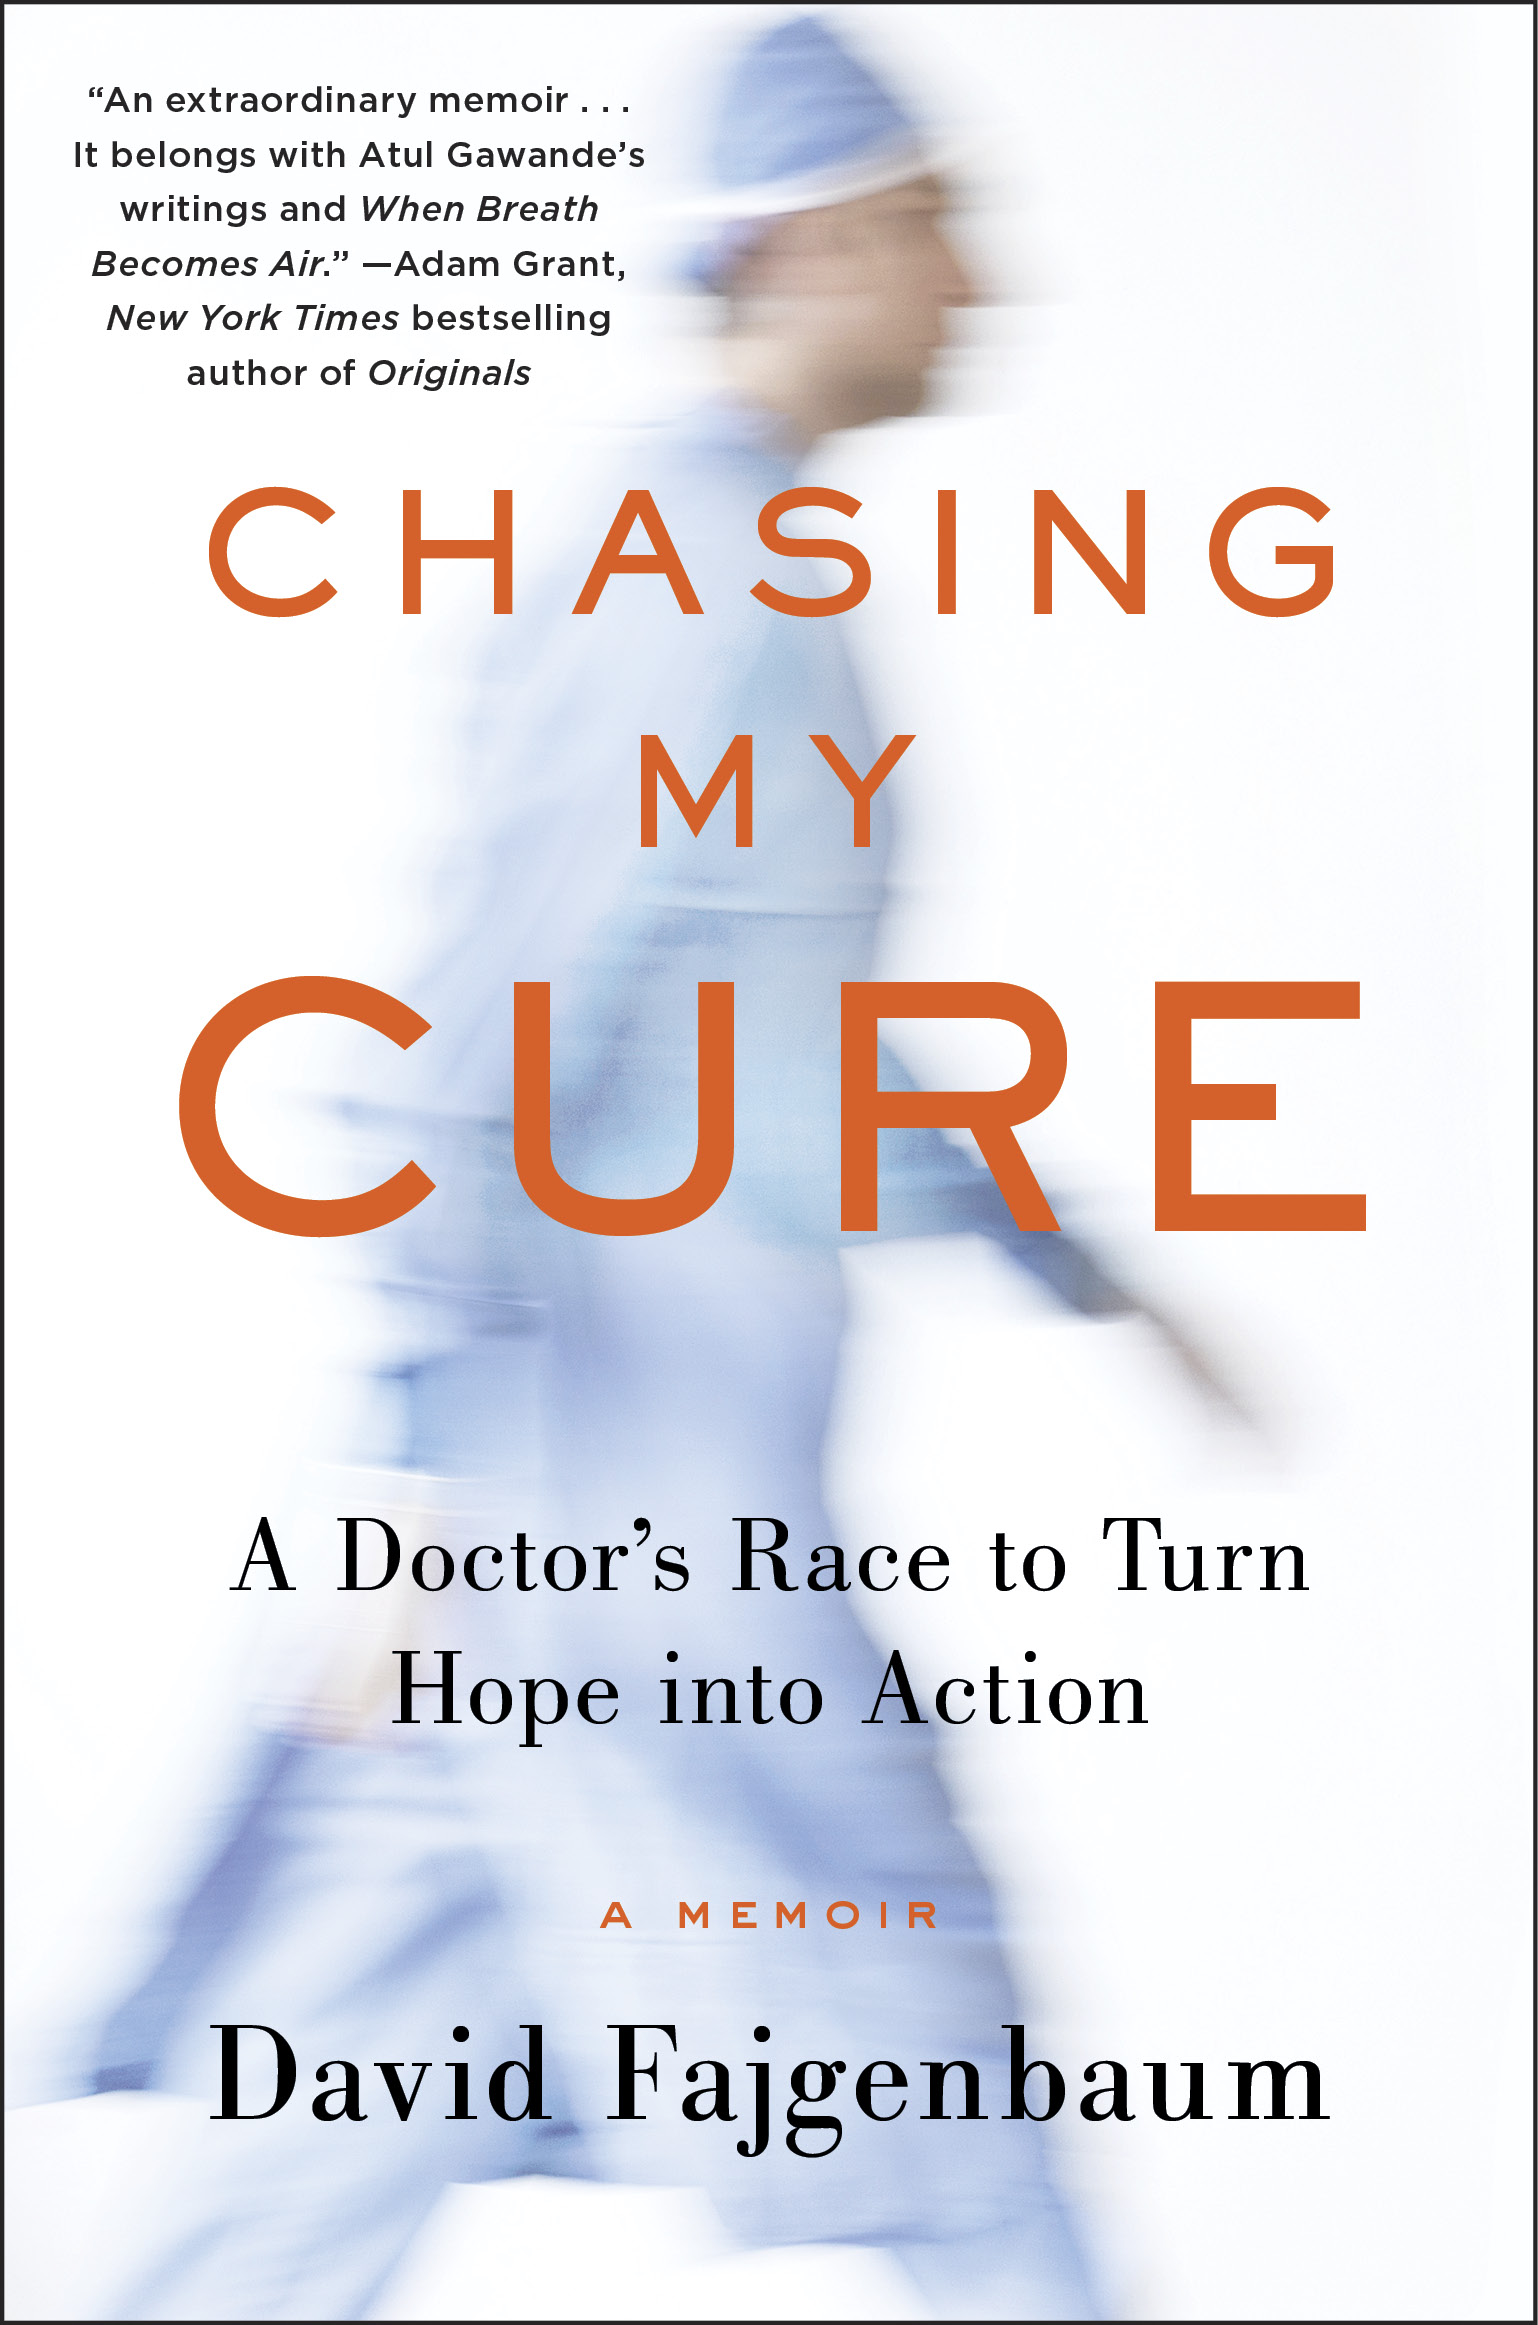 Five life lessons from Chasing My Cure that we need to share during COVID19